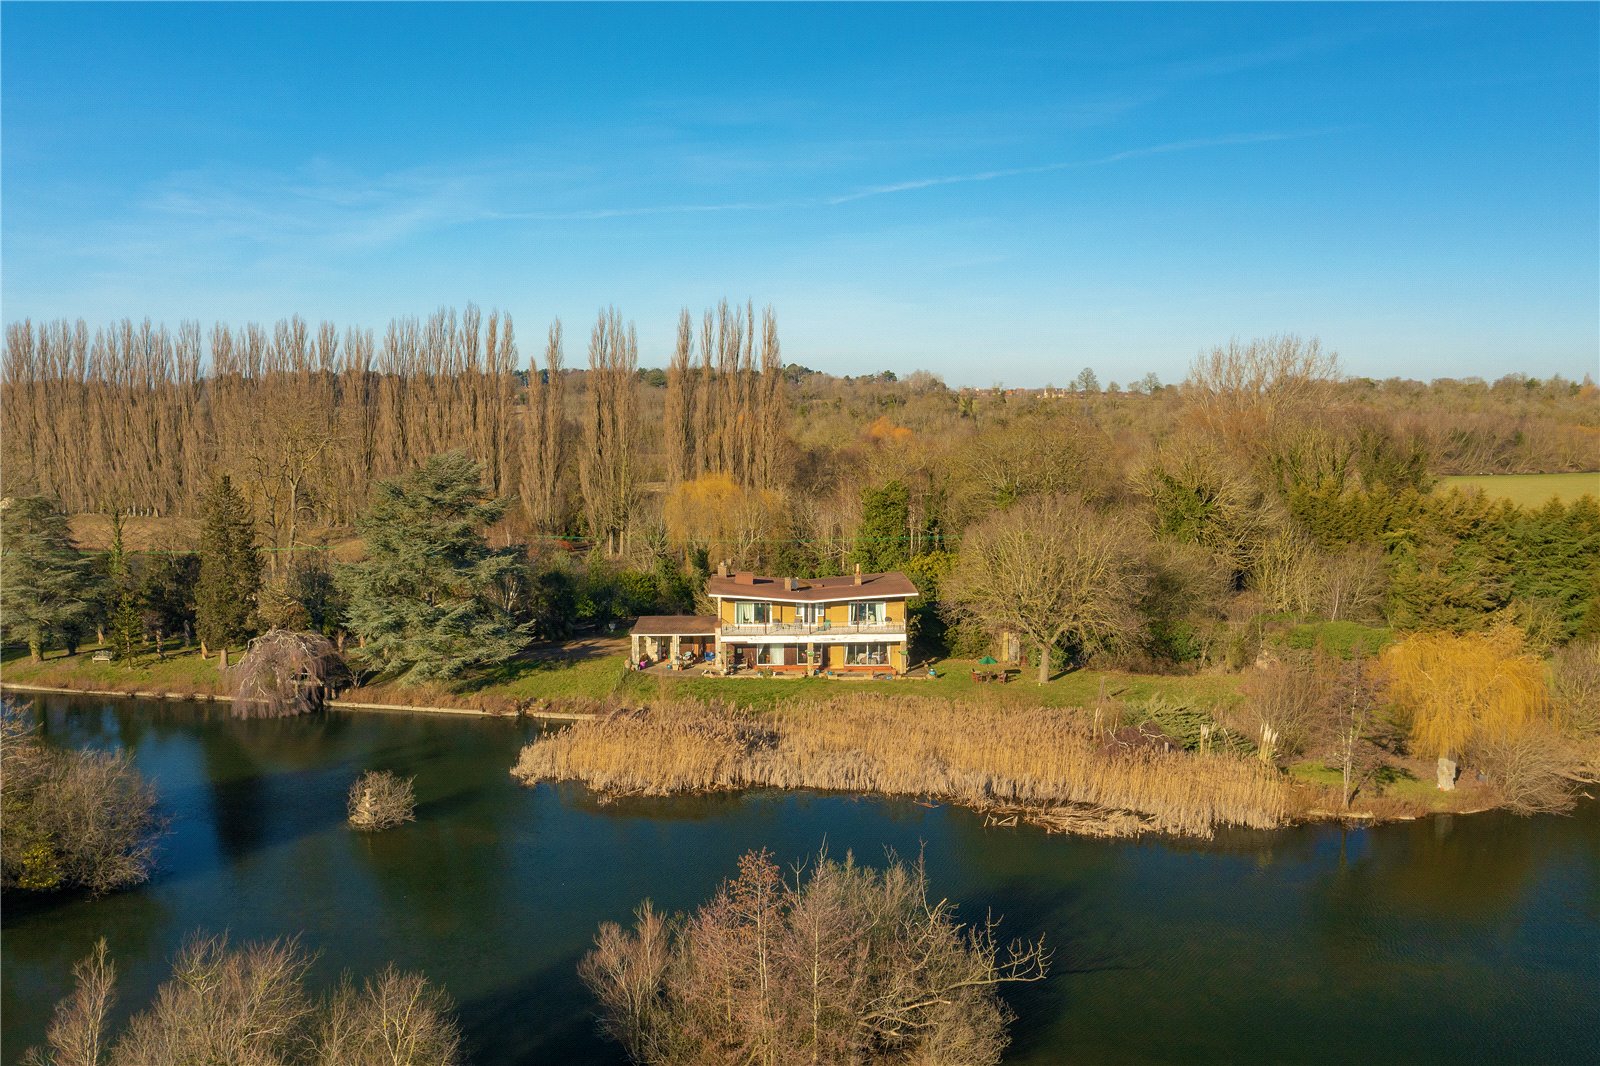 7 bedroom country house for sale in Gloucester